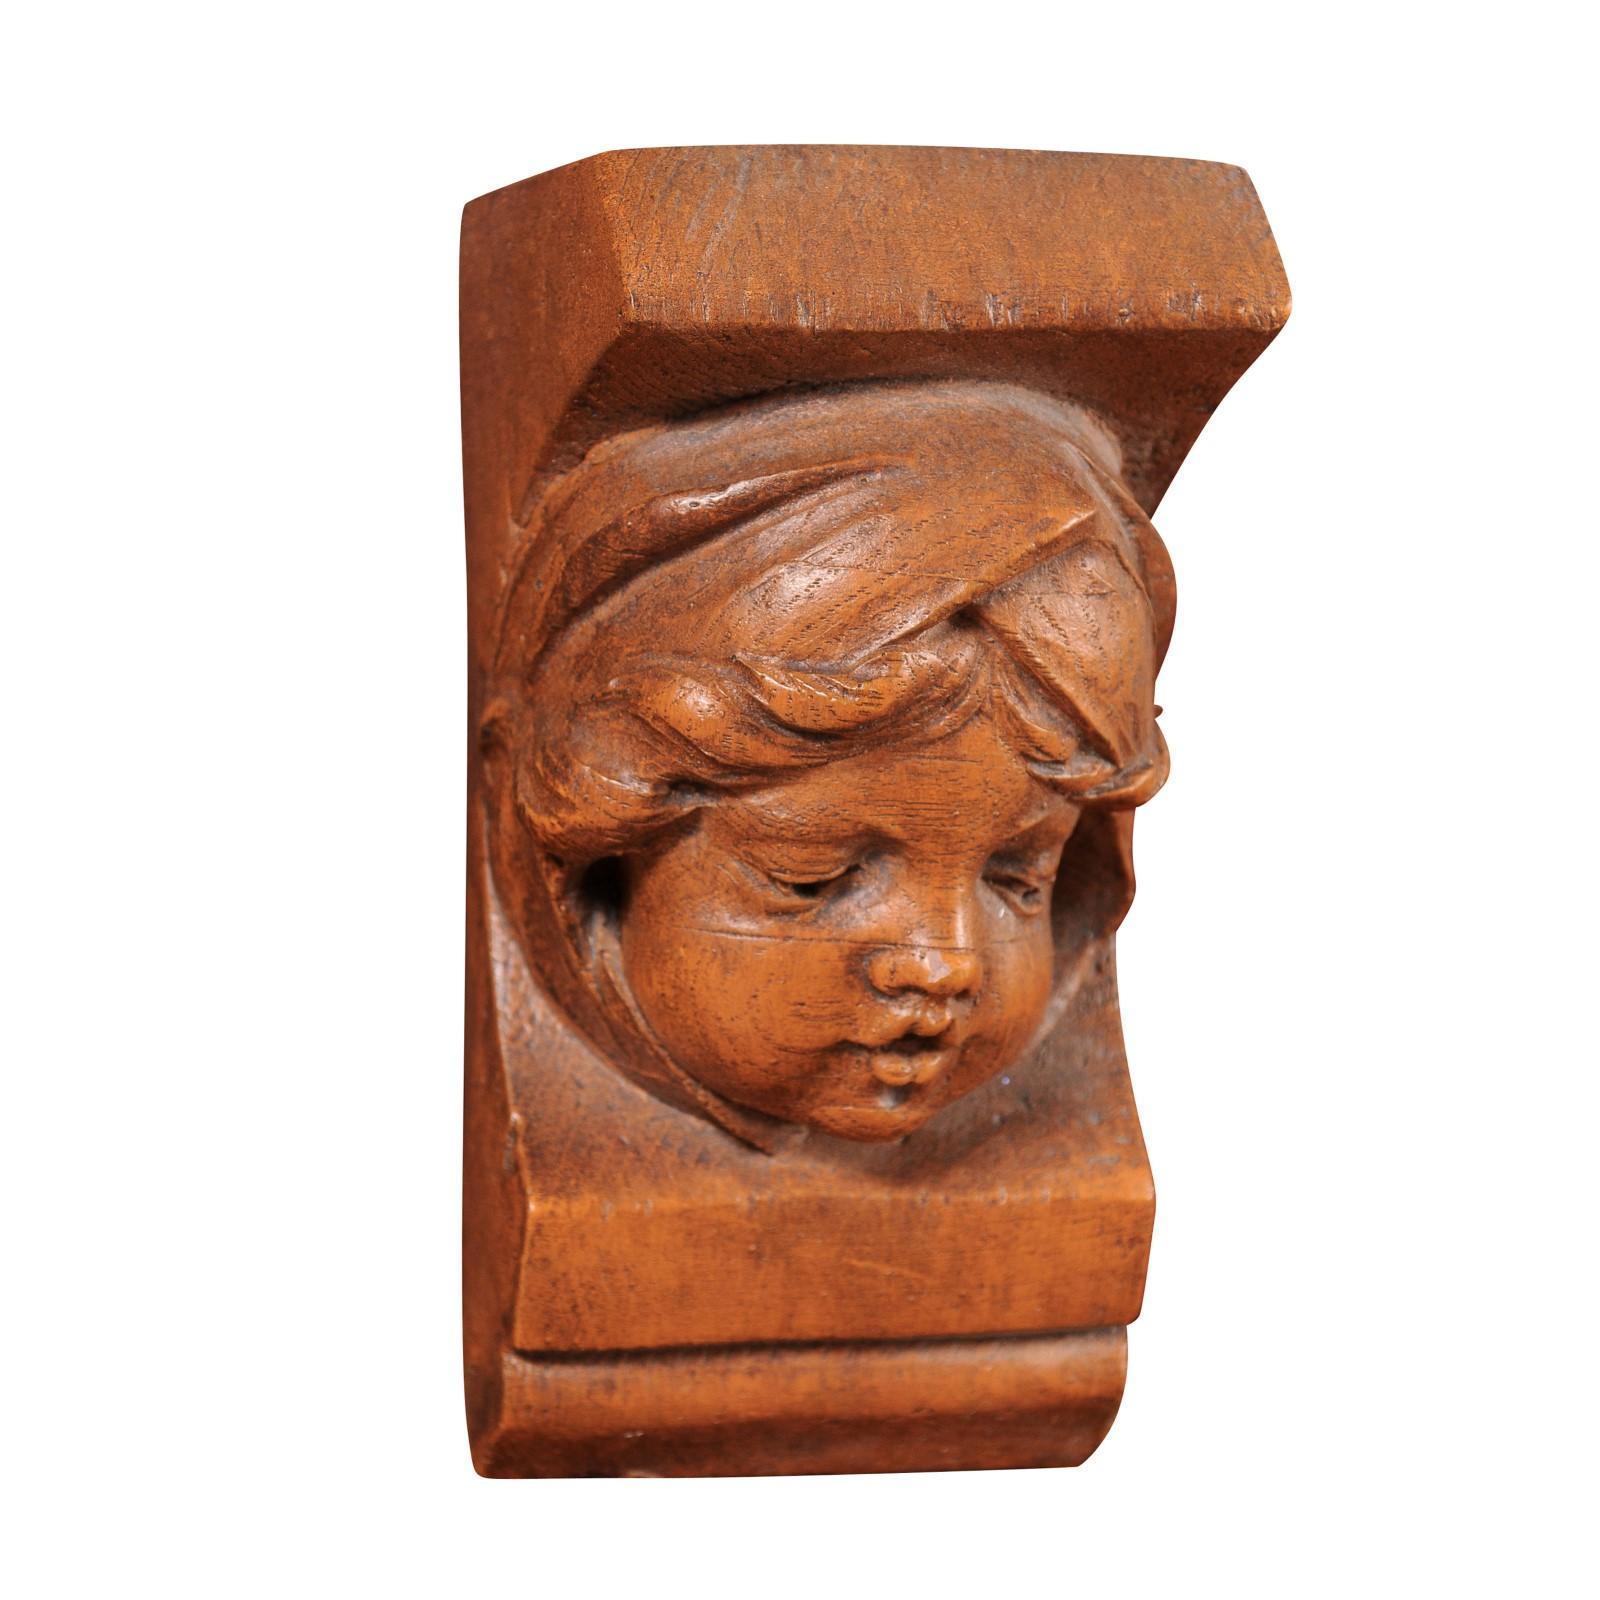 A French terracotta wall bracket from the 20th century depicting an angel face. This charming 20th-century French terracotta wall bracket is a delightful piece of artistry that effortlessly captures the innocence and beauty of an angelic face.